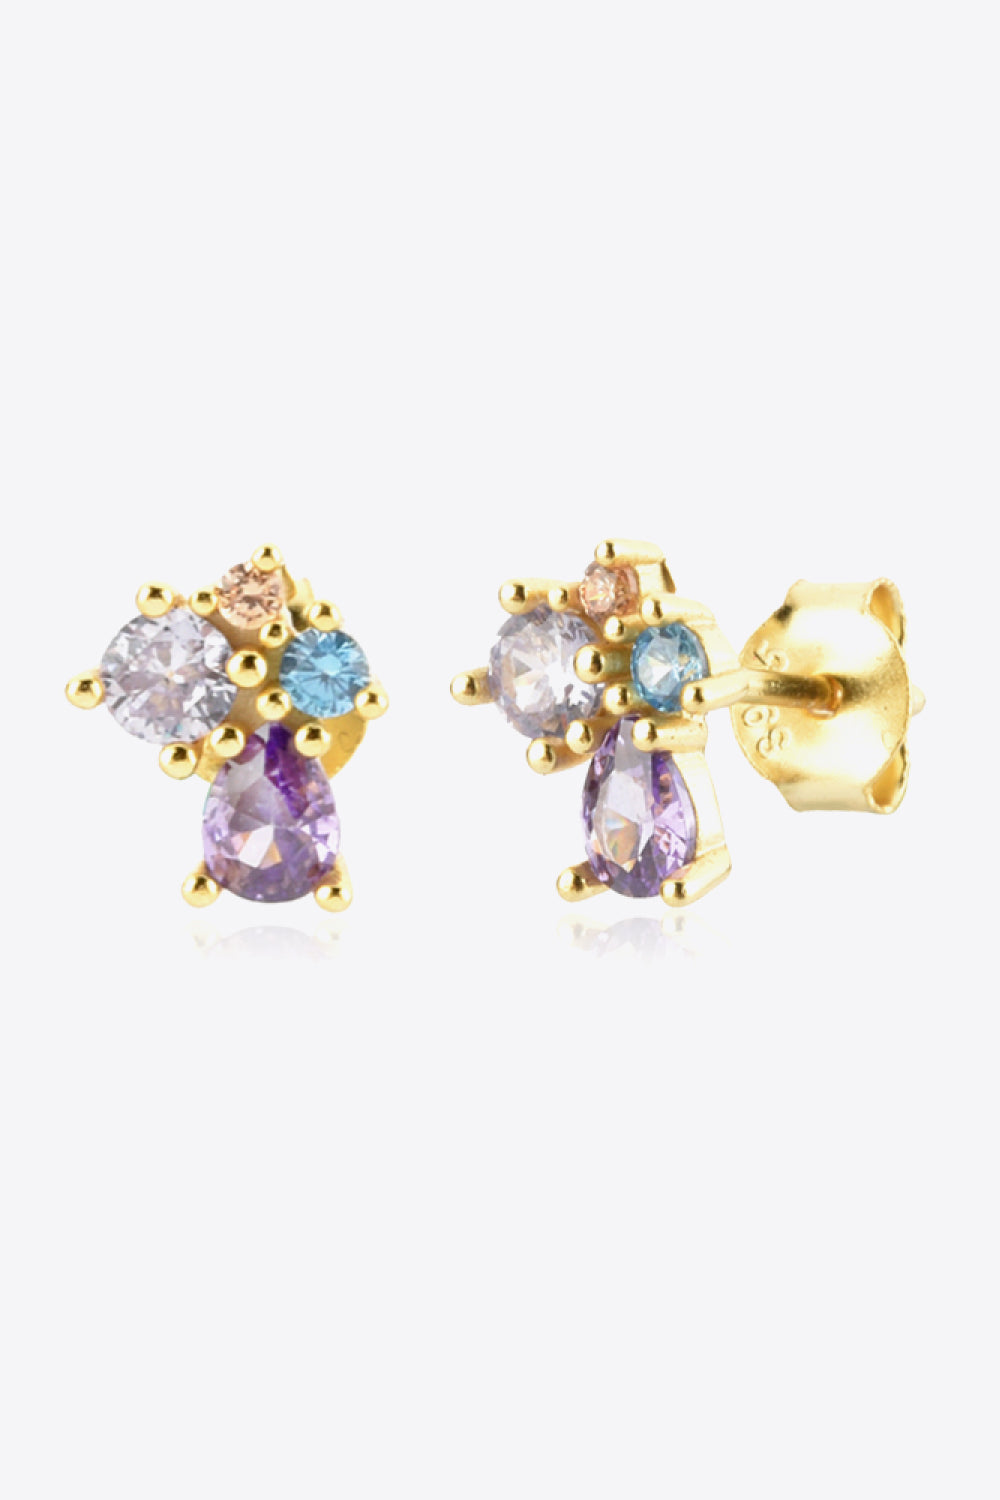 PURPLE ONE SIZE - Multicolored Zircon 925 Sterling Silver Gold Plated Stud Earrings - 2 colors - earrings at TFC&H Co.